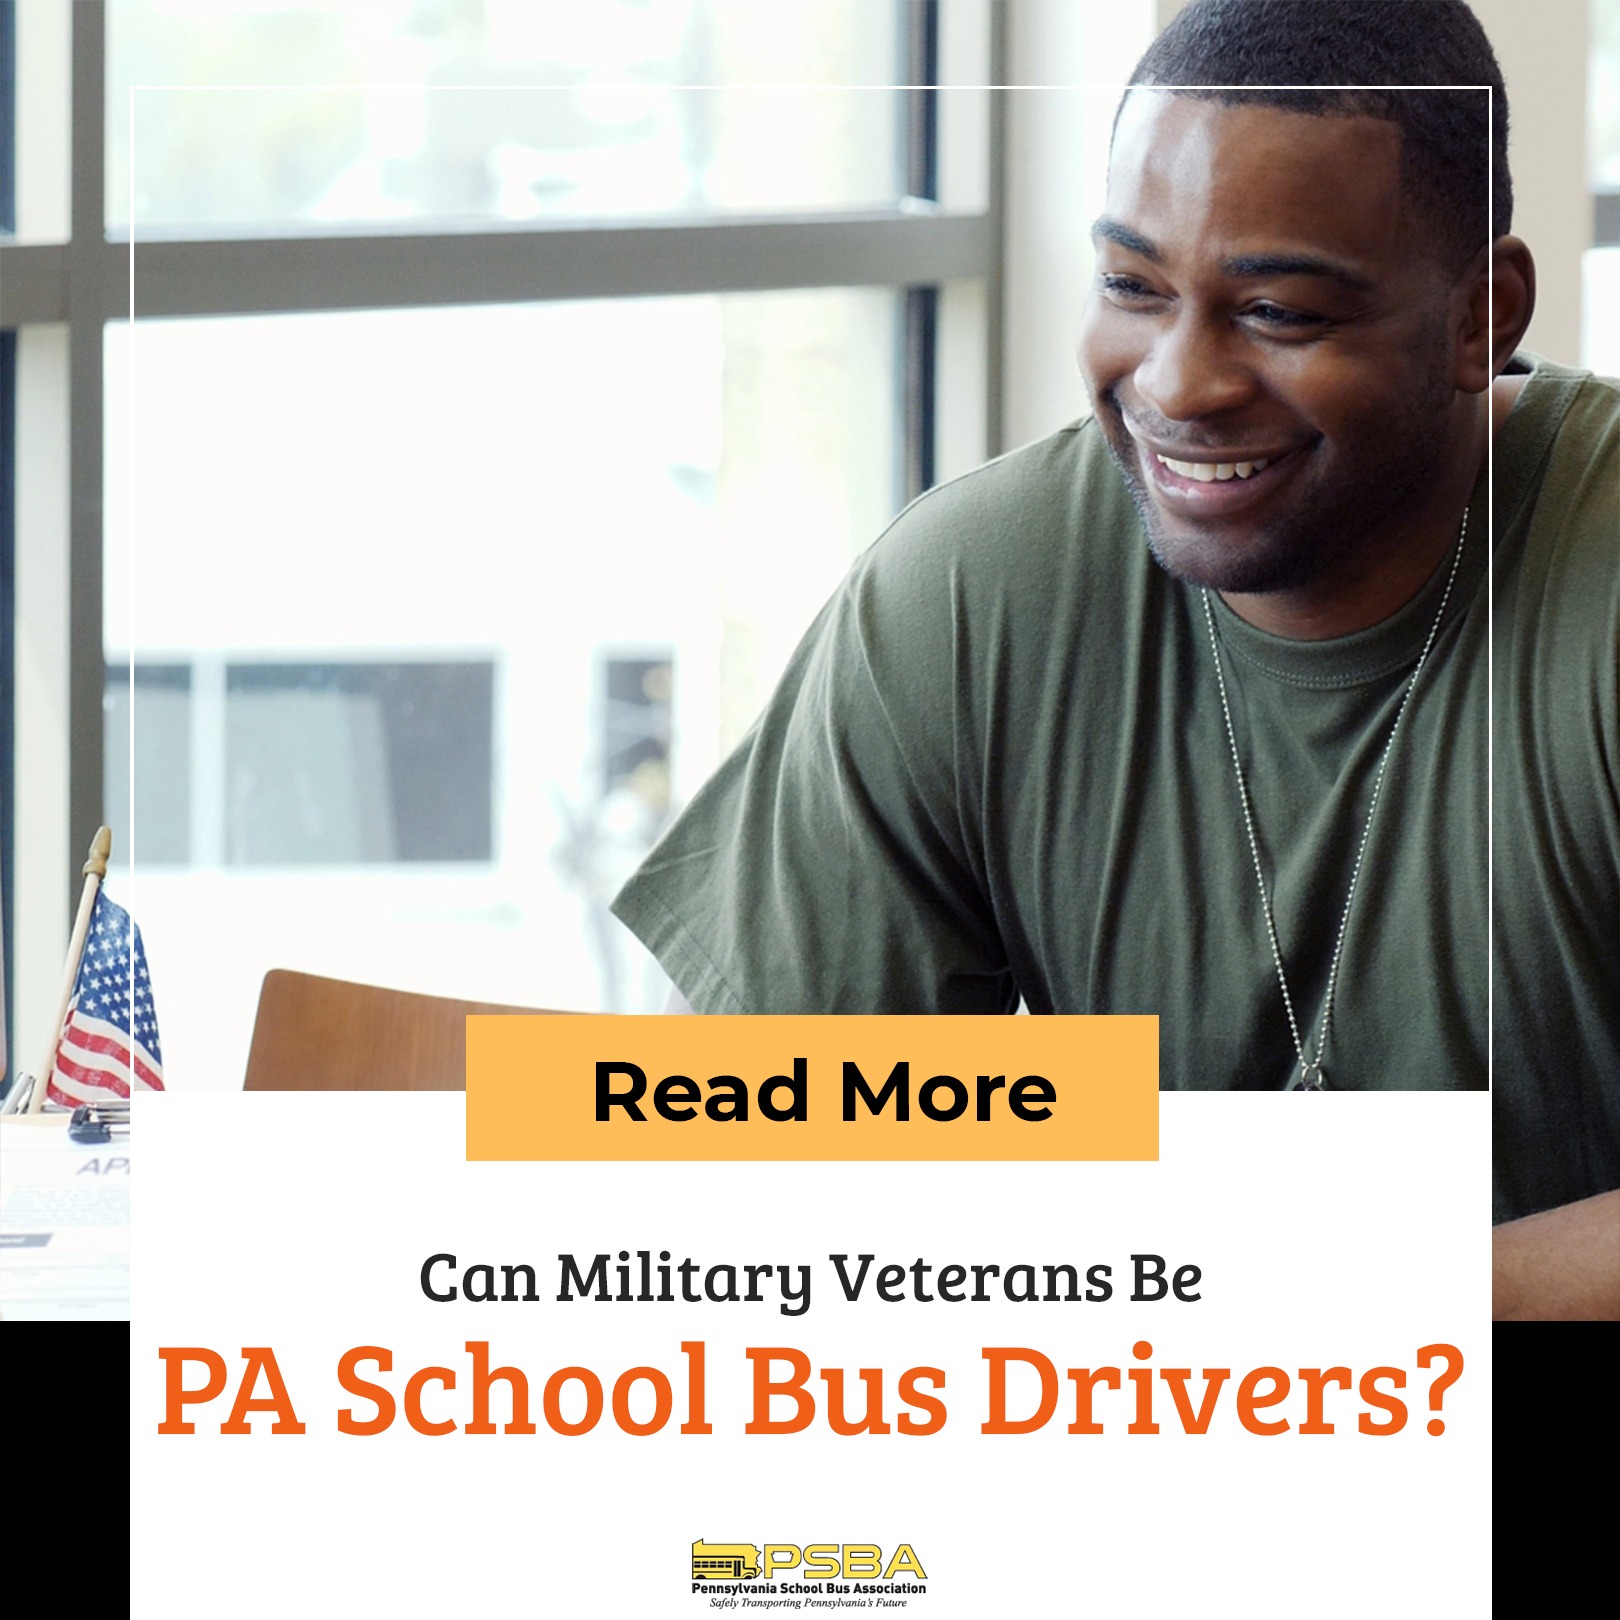 Can Military Veterans Be School Bus Drivers?